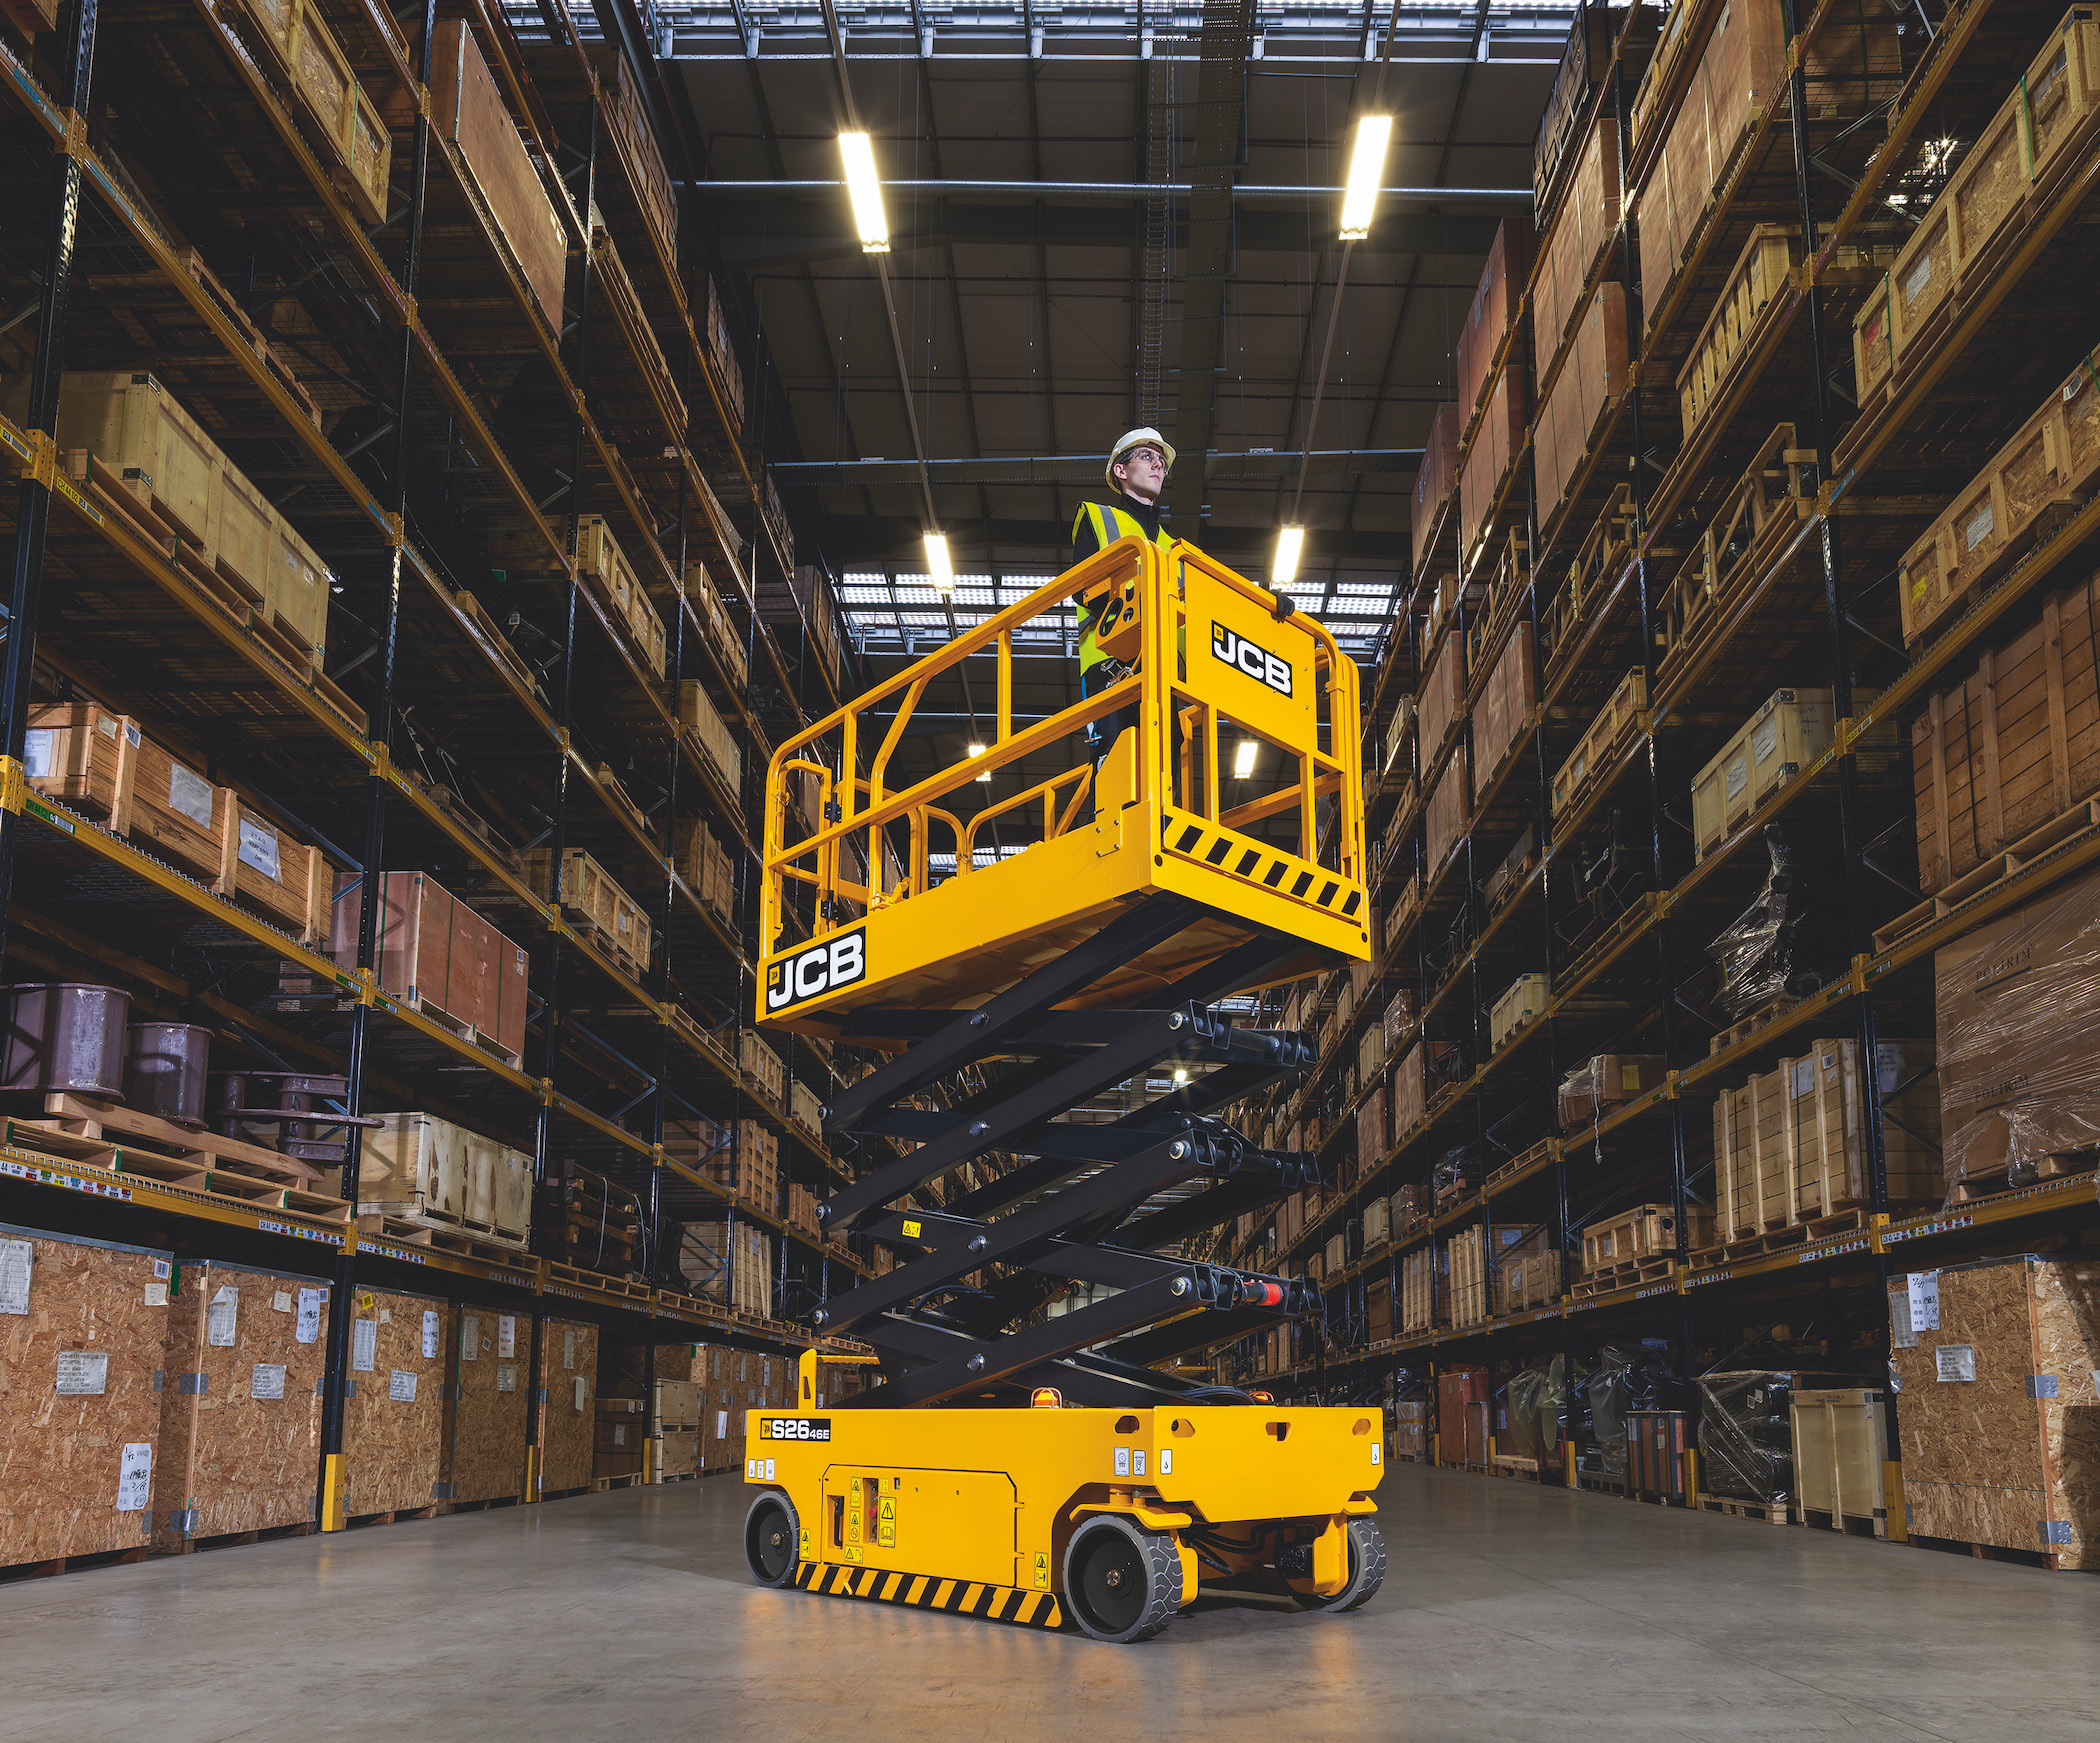 In 2017, JCB entered the $8-billion global mobile elevating work platform market, with a range of aerial work platforms designed to meet the needs of rental companies and contractors.